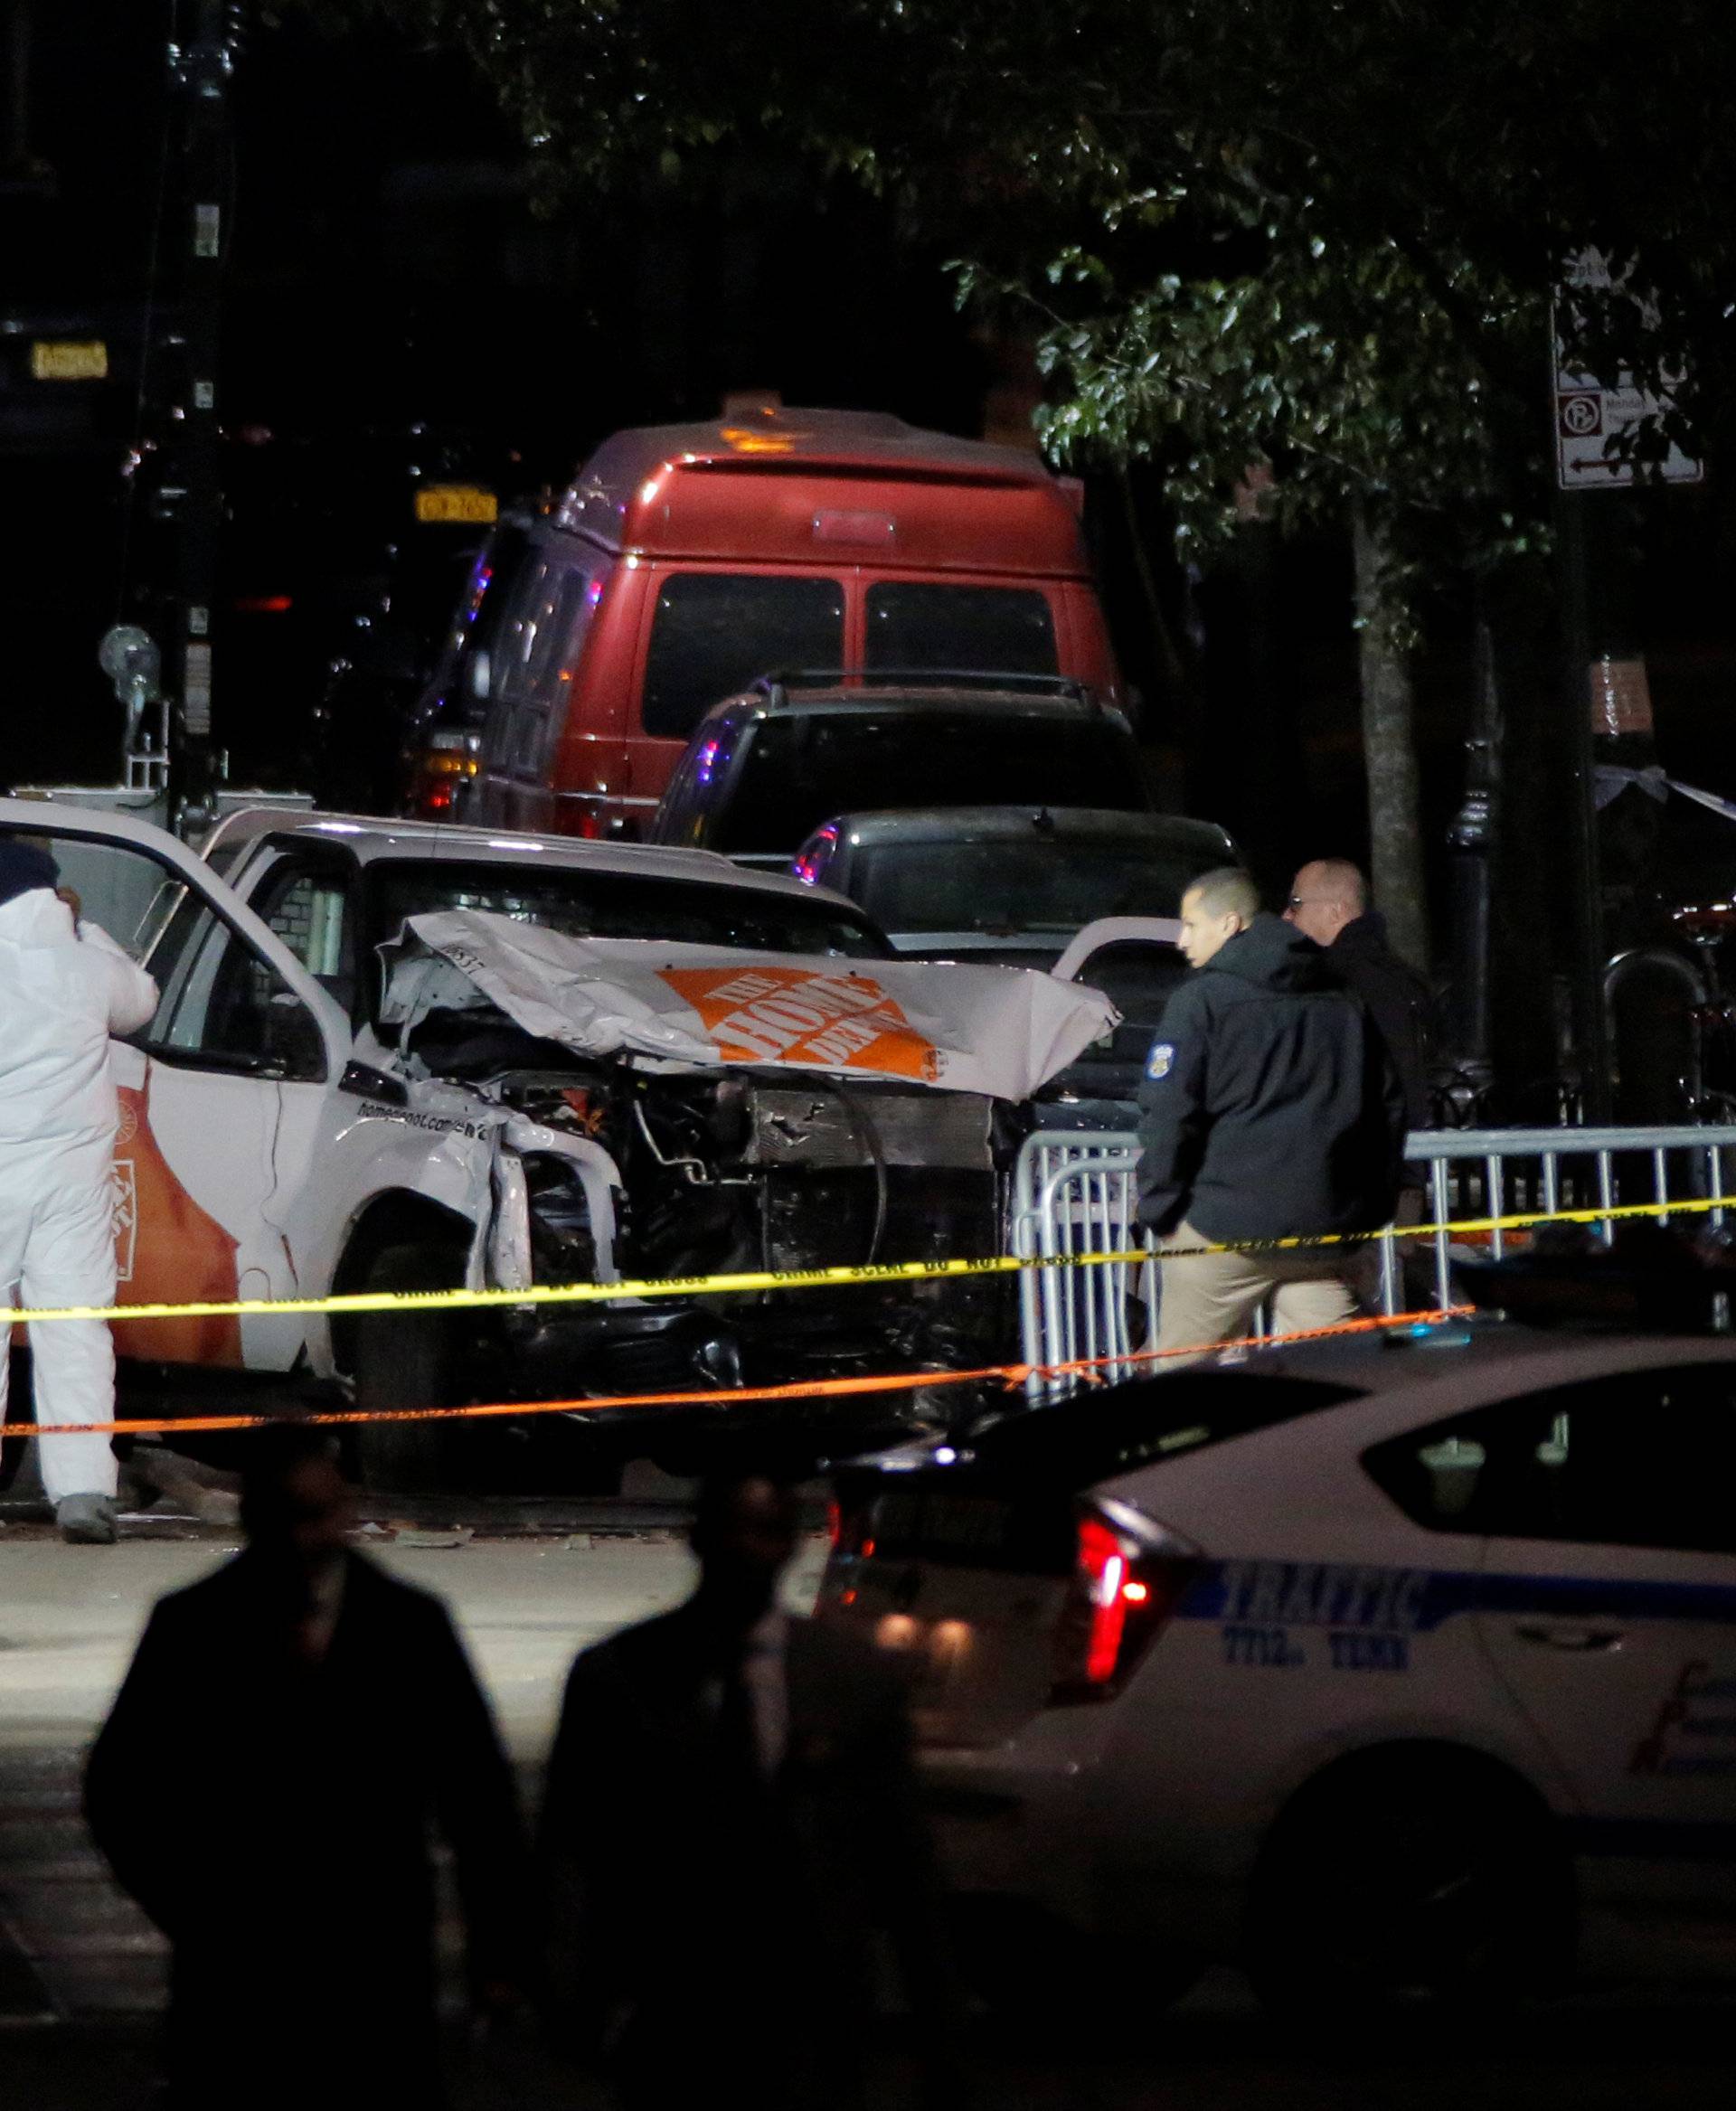 Police investigate a pickup truck used in an attack on the West Side Highway in Manhattan